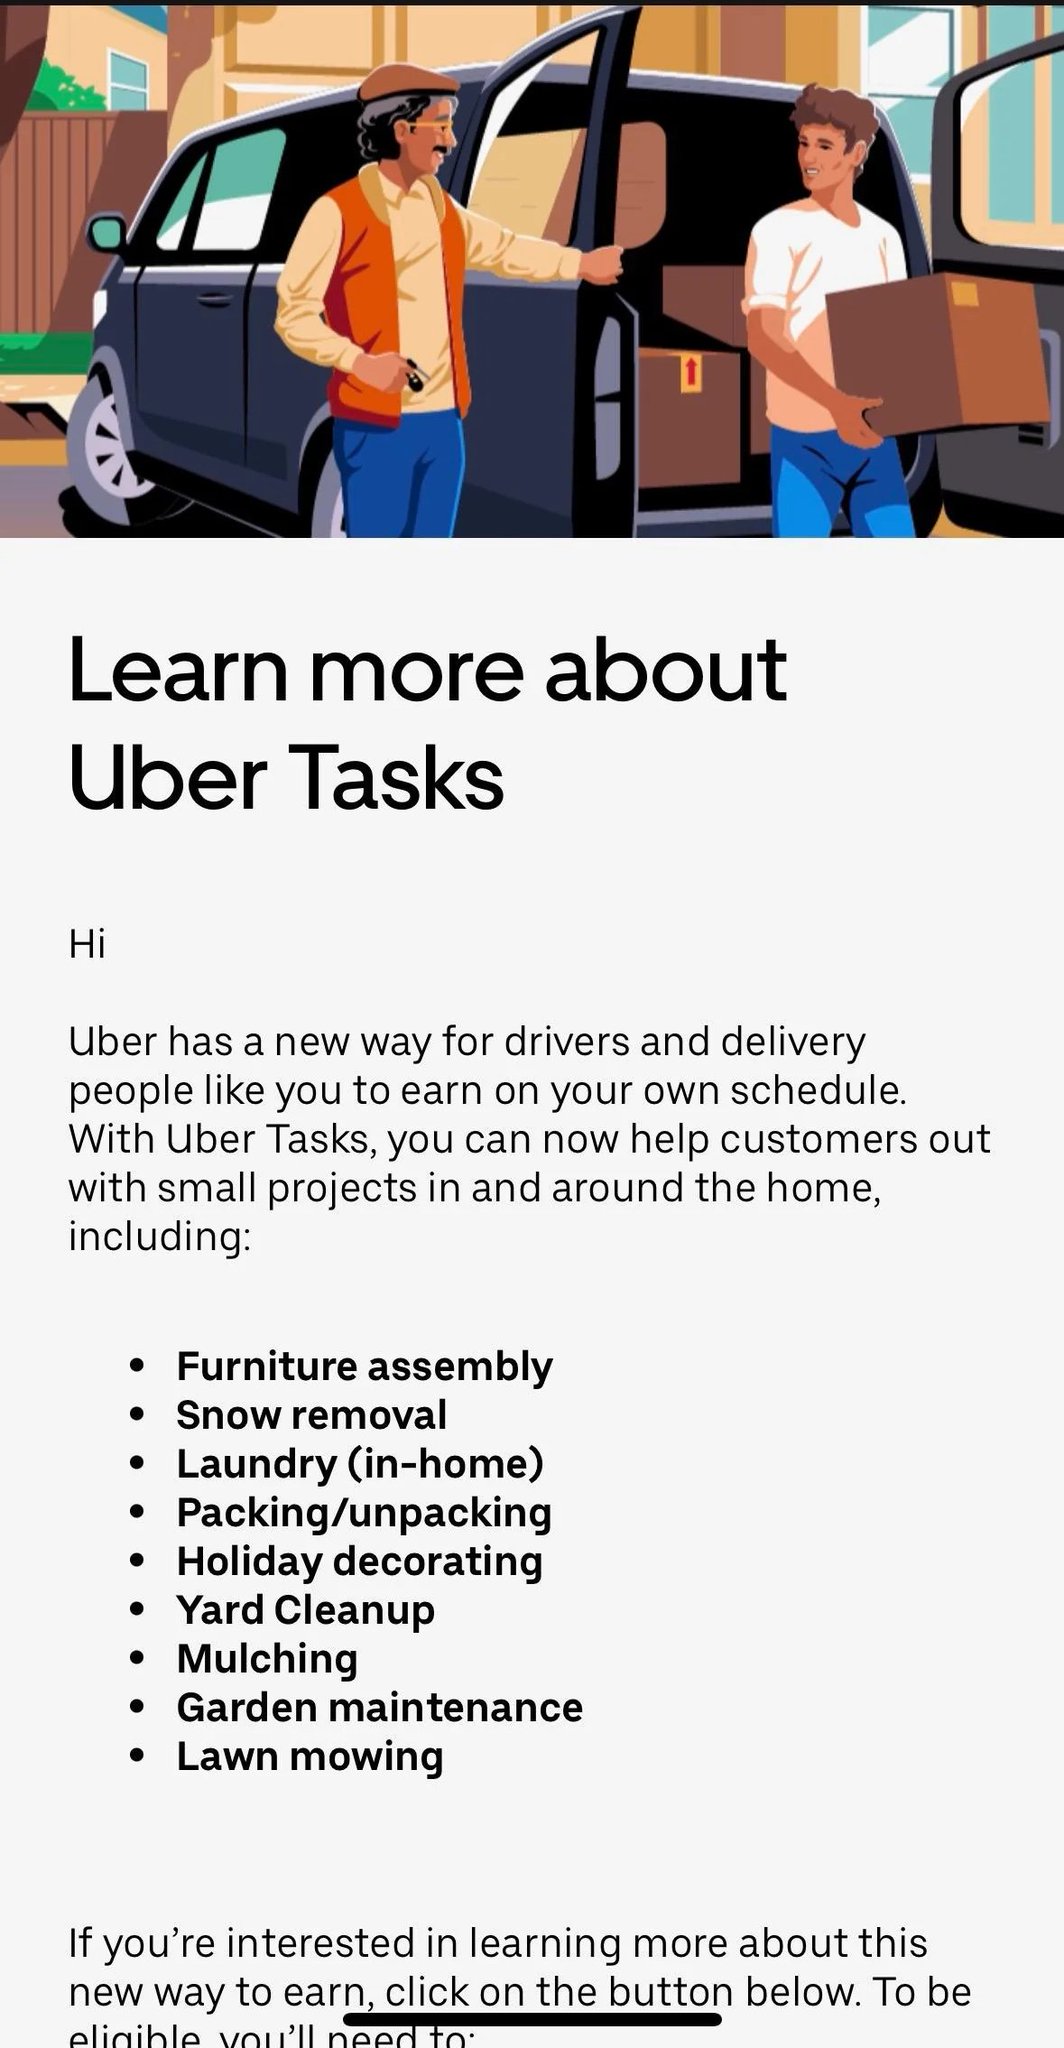 Uber Tasks' is like Uber Eats. But you'll get completed chores